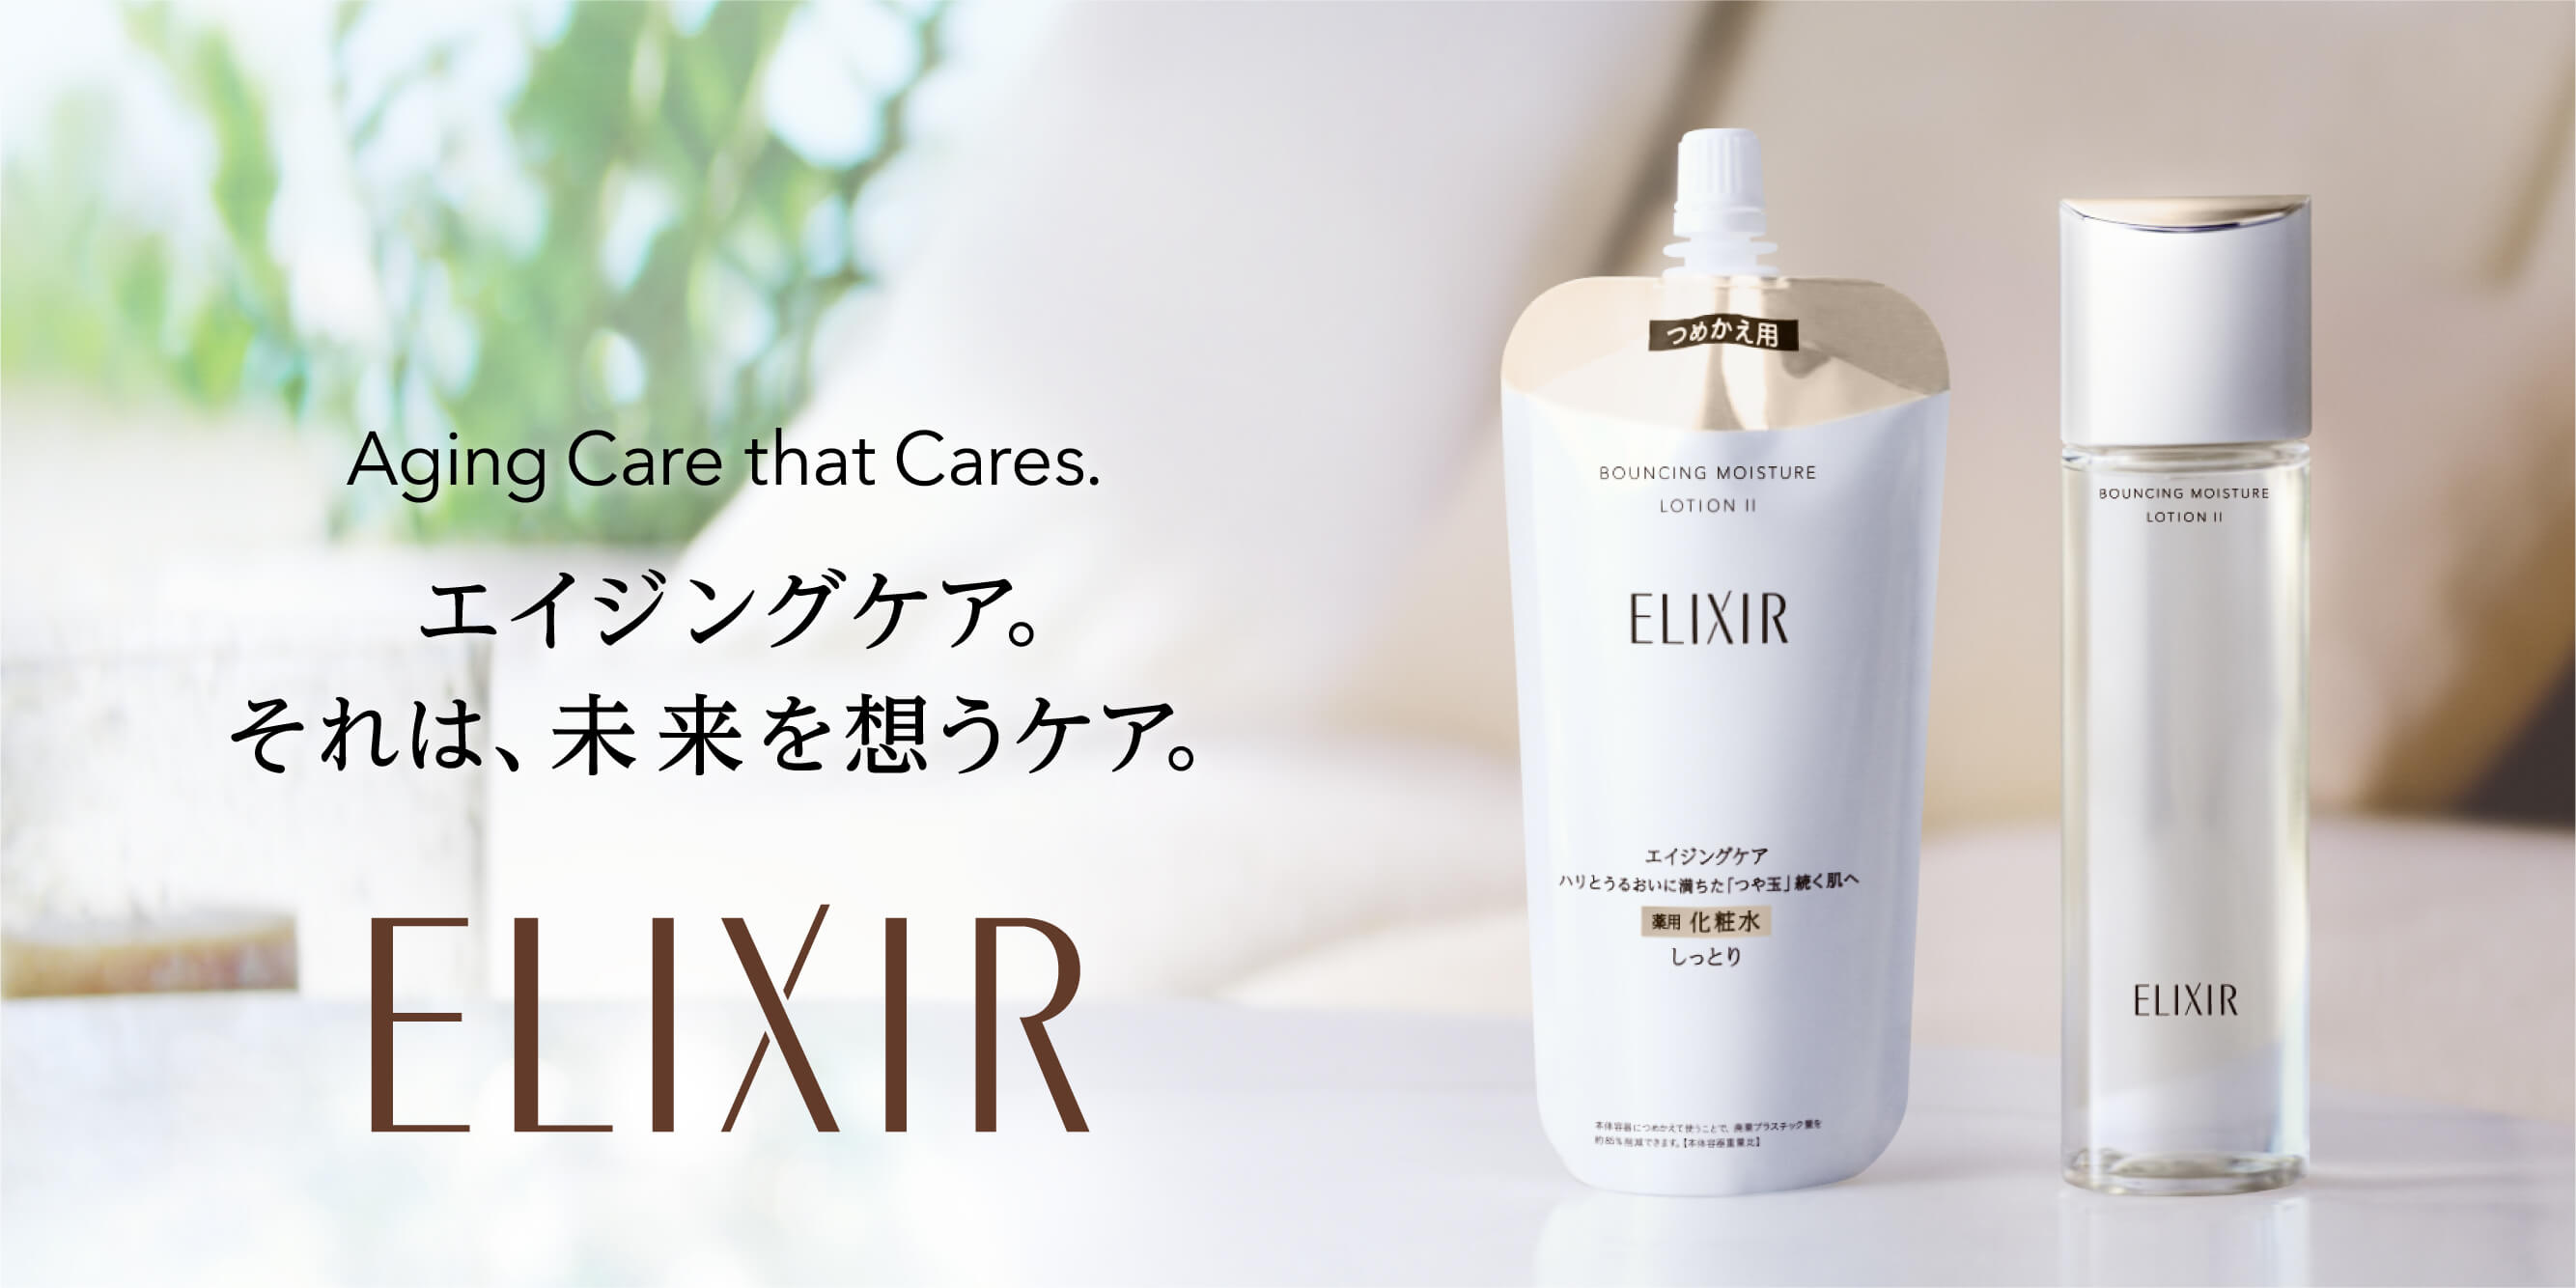 Aging Care that Cares. エイジングケア。それは、未来を思うケア。